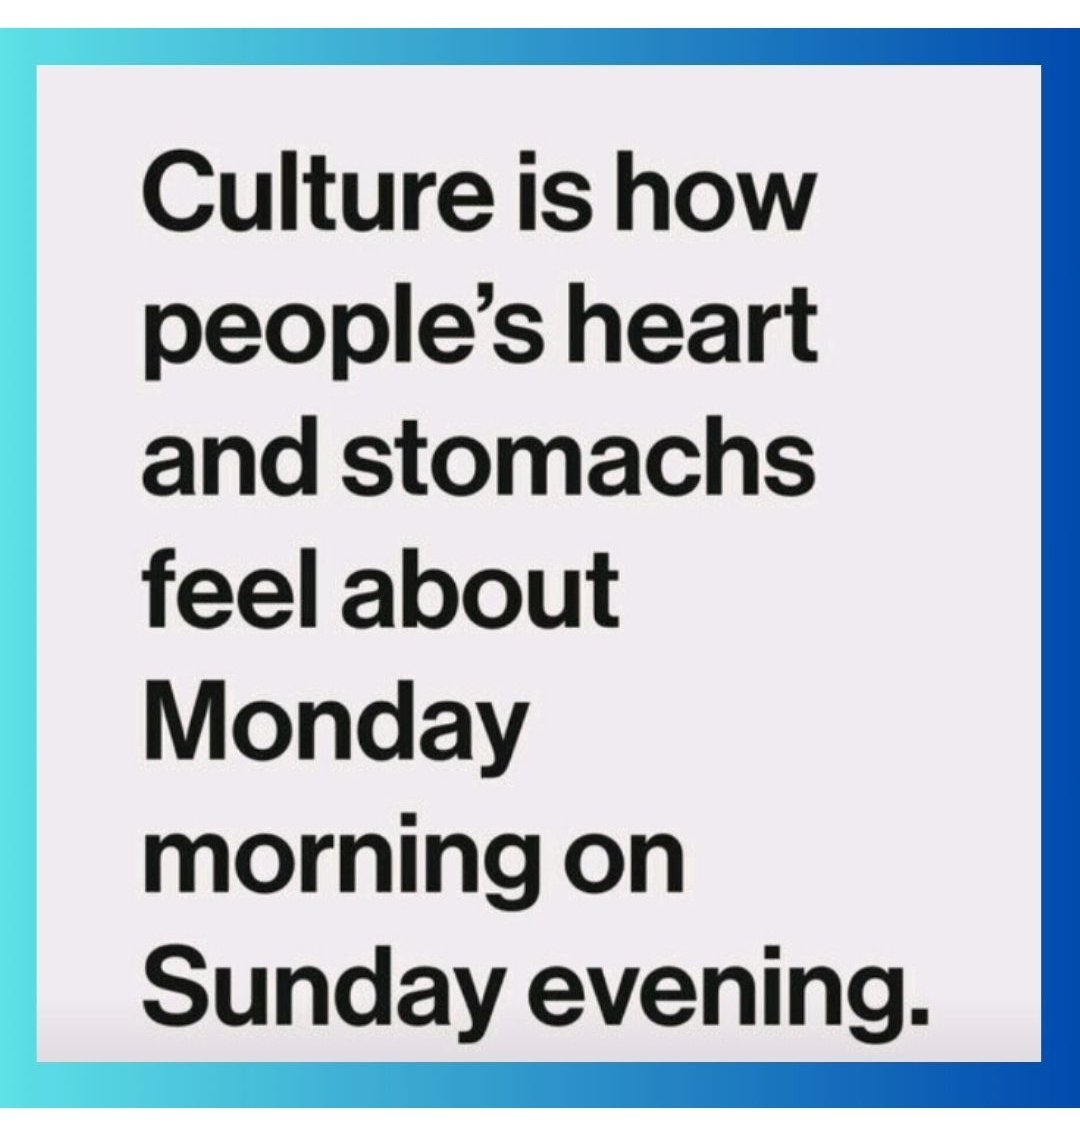 The 'Sunday Scaries' are all too real for many people.
#workplaceculture #MentalHealthMatters #workplaceconversations #SundayScaries